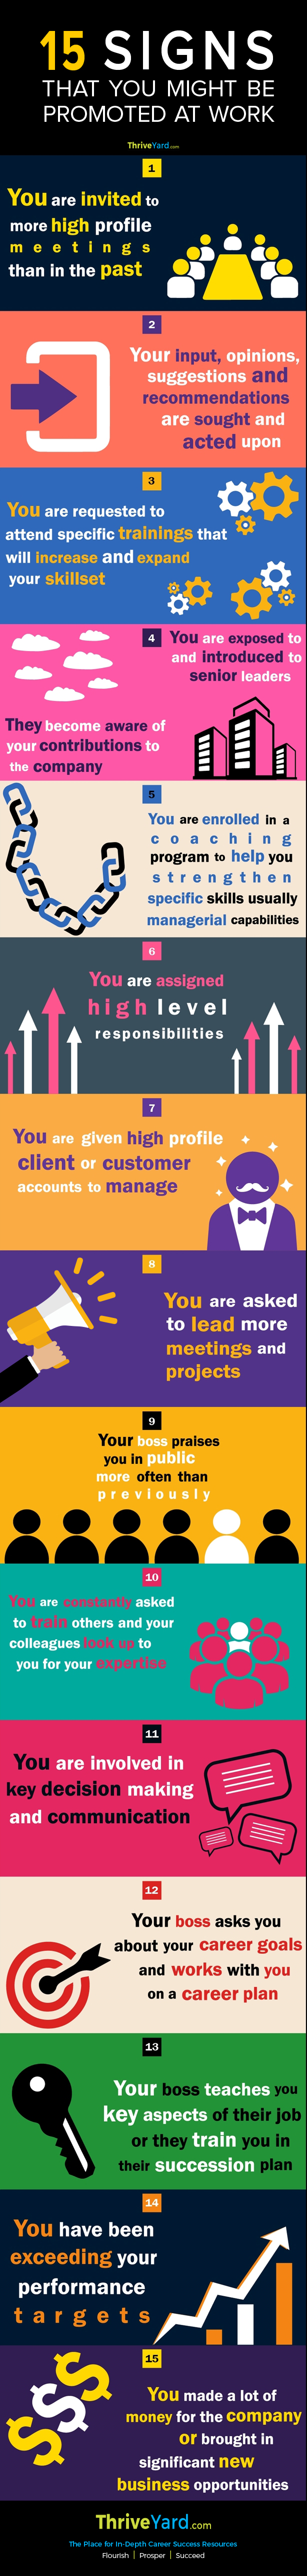 15 Signs That You Might Be Promoted At Work - Infographic